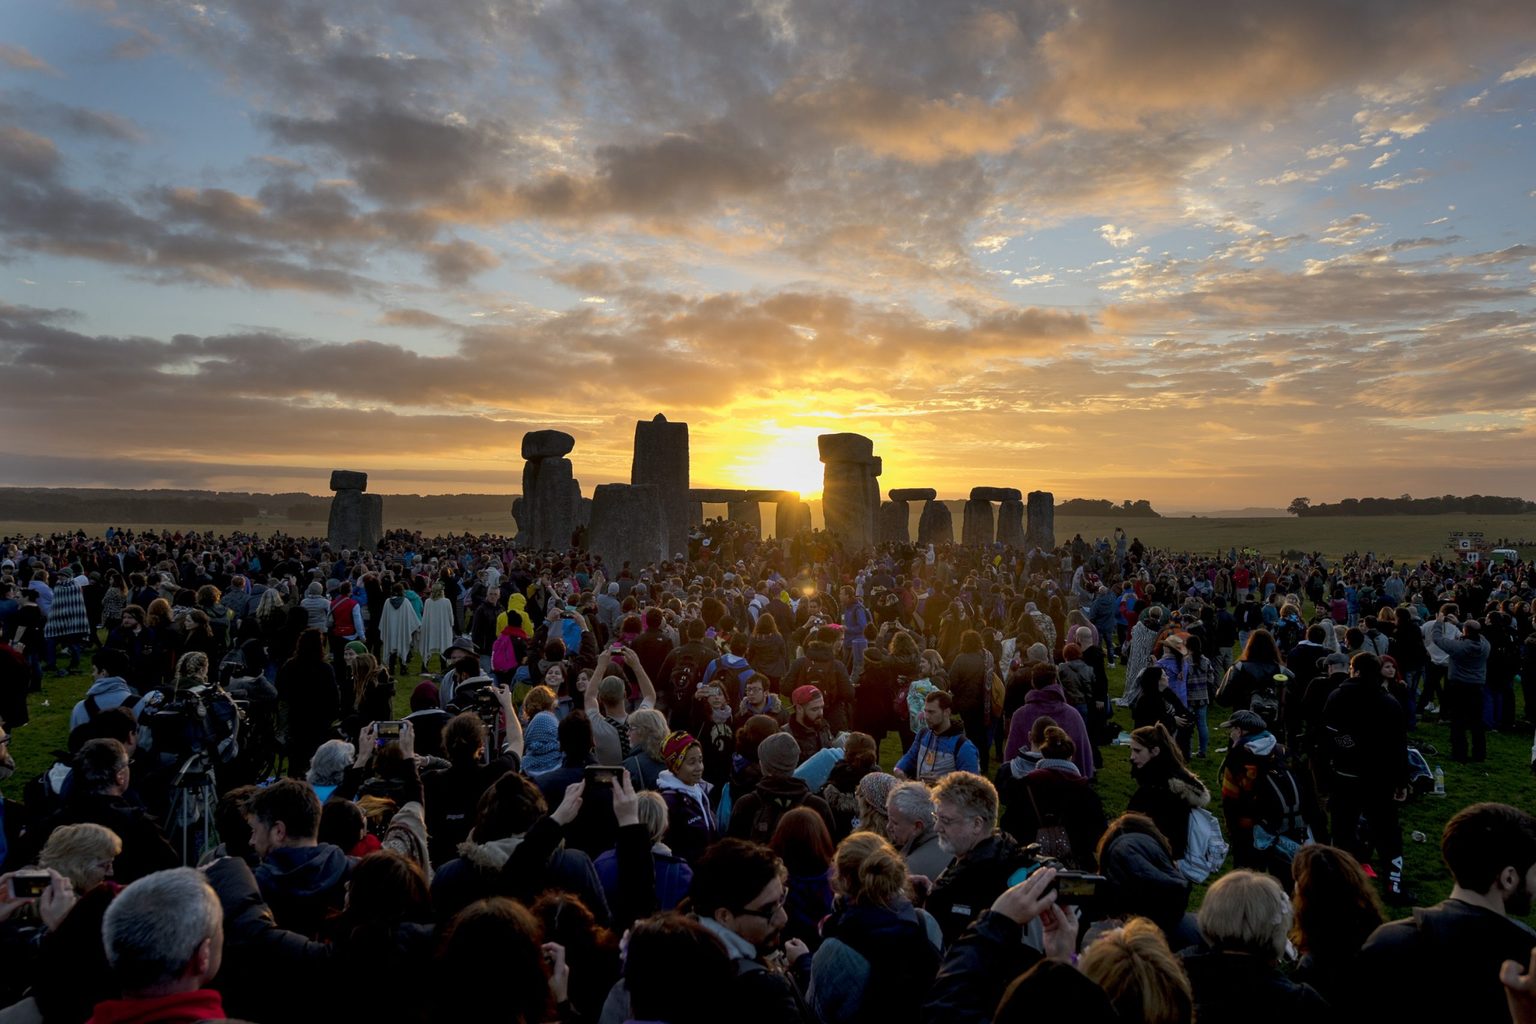 17 Summer Solstice Traditions Around the World Festivals, Parties, Games